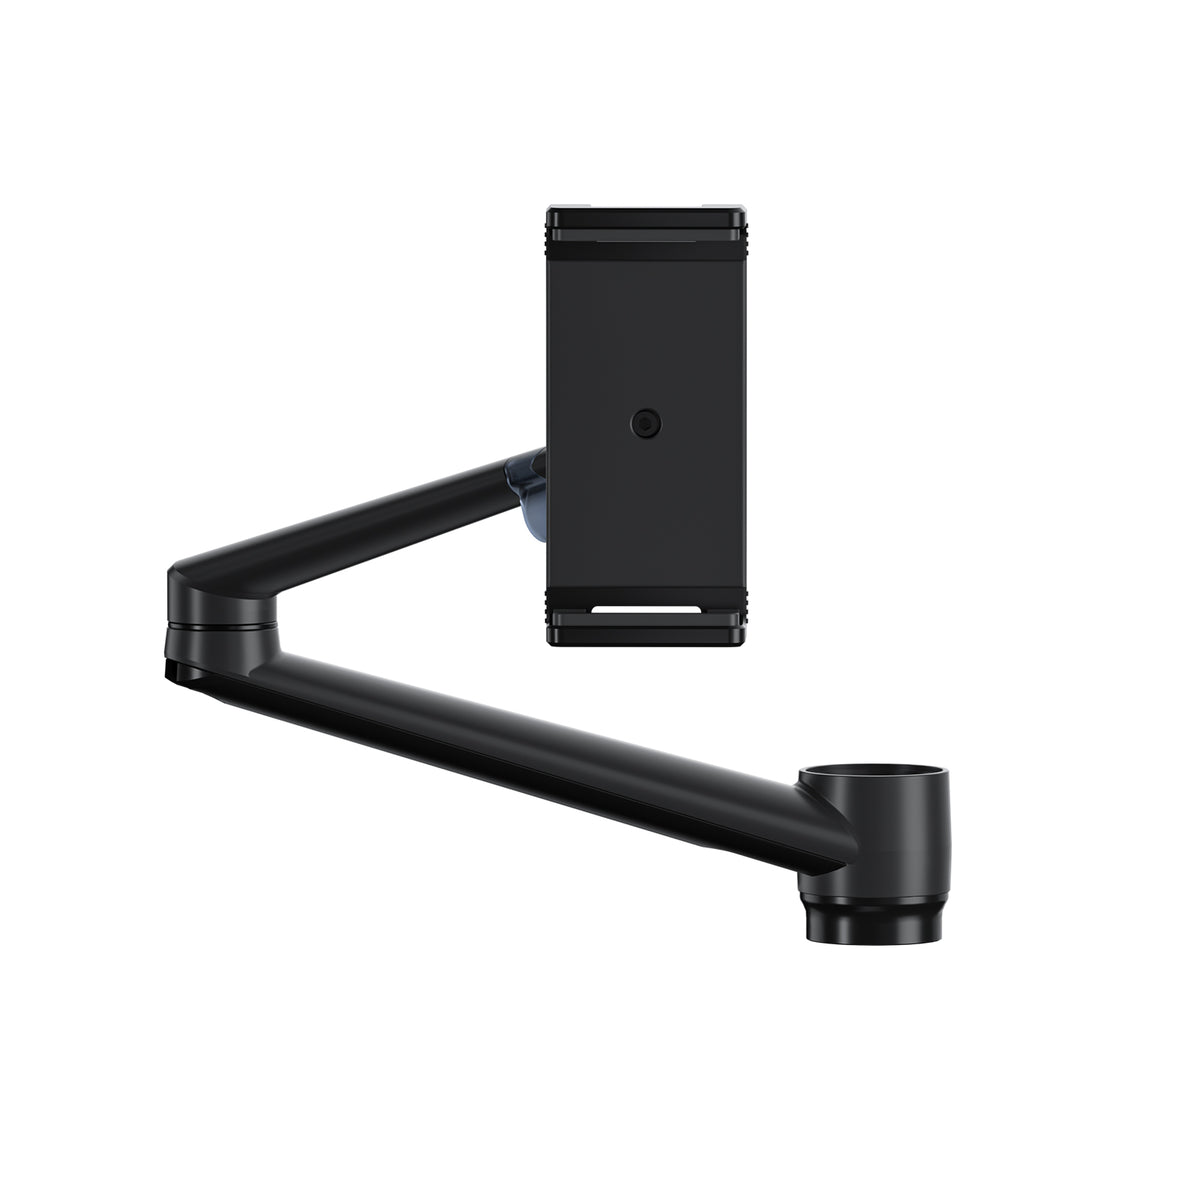 Viozon Tablet Holder with Arm (DZ-TH)